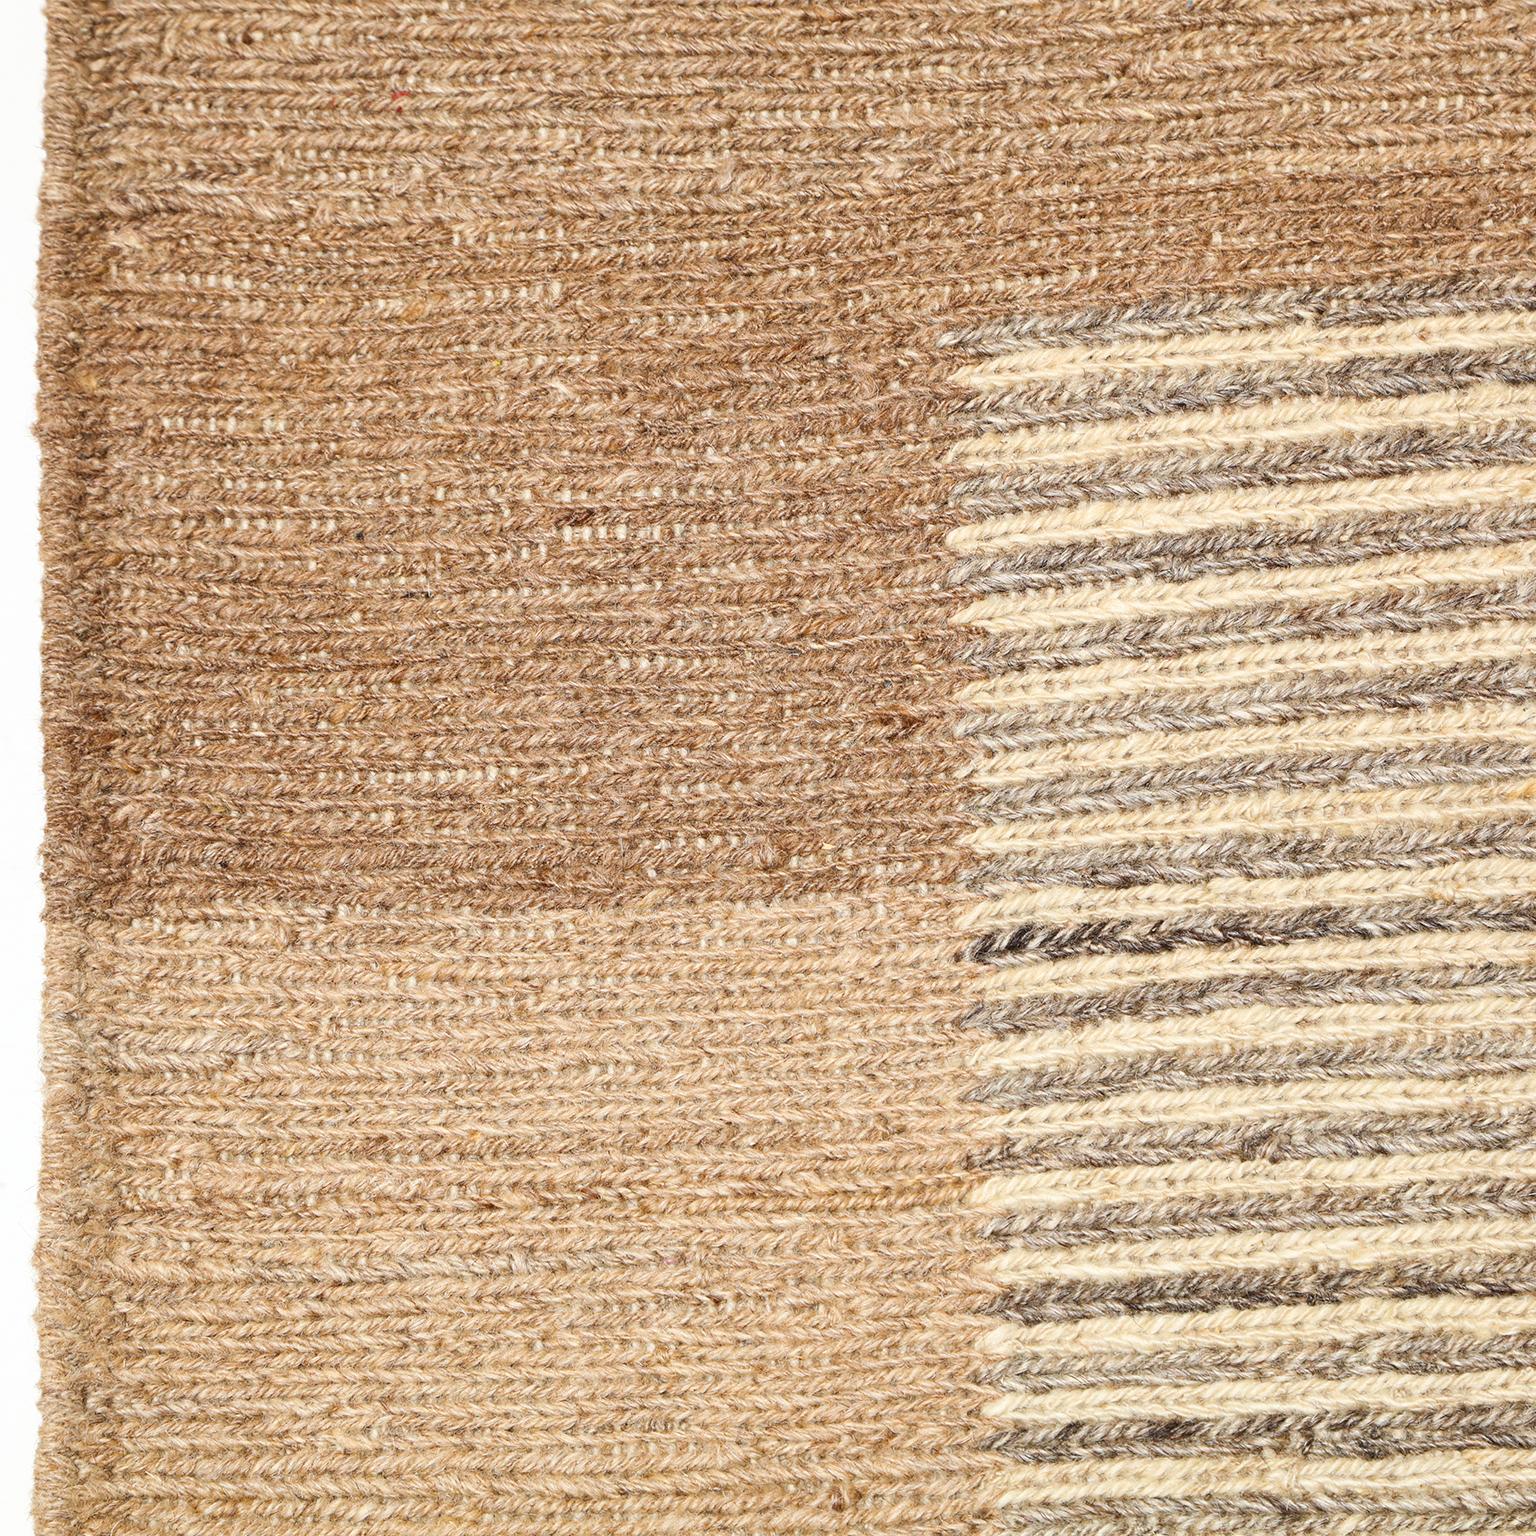 Contemporary Organic Modern Wool Persian Flat-Weave Rug, Neutral, Orley Shabahang, 5' x 7' For Sale